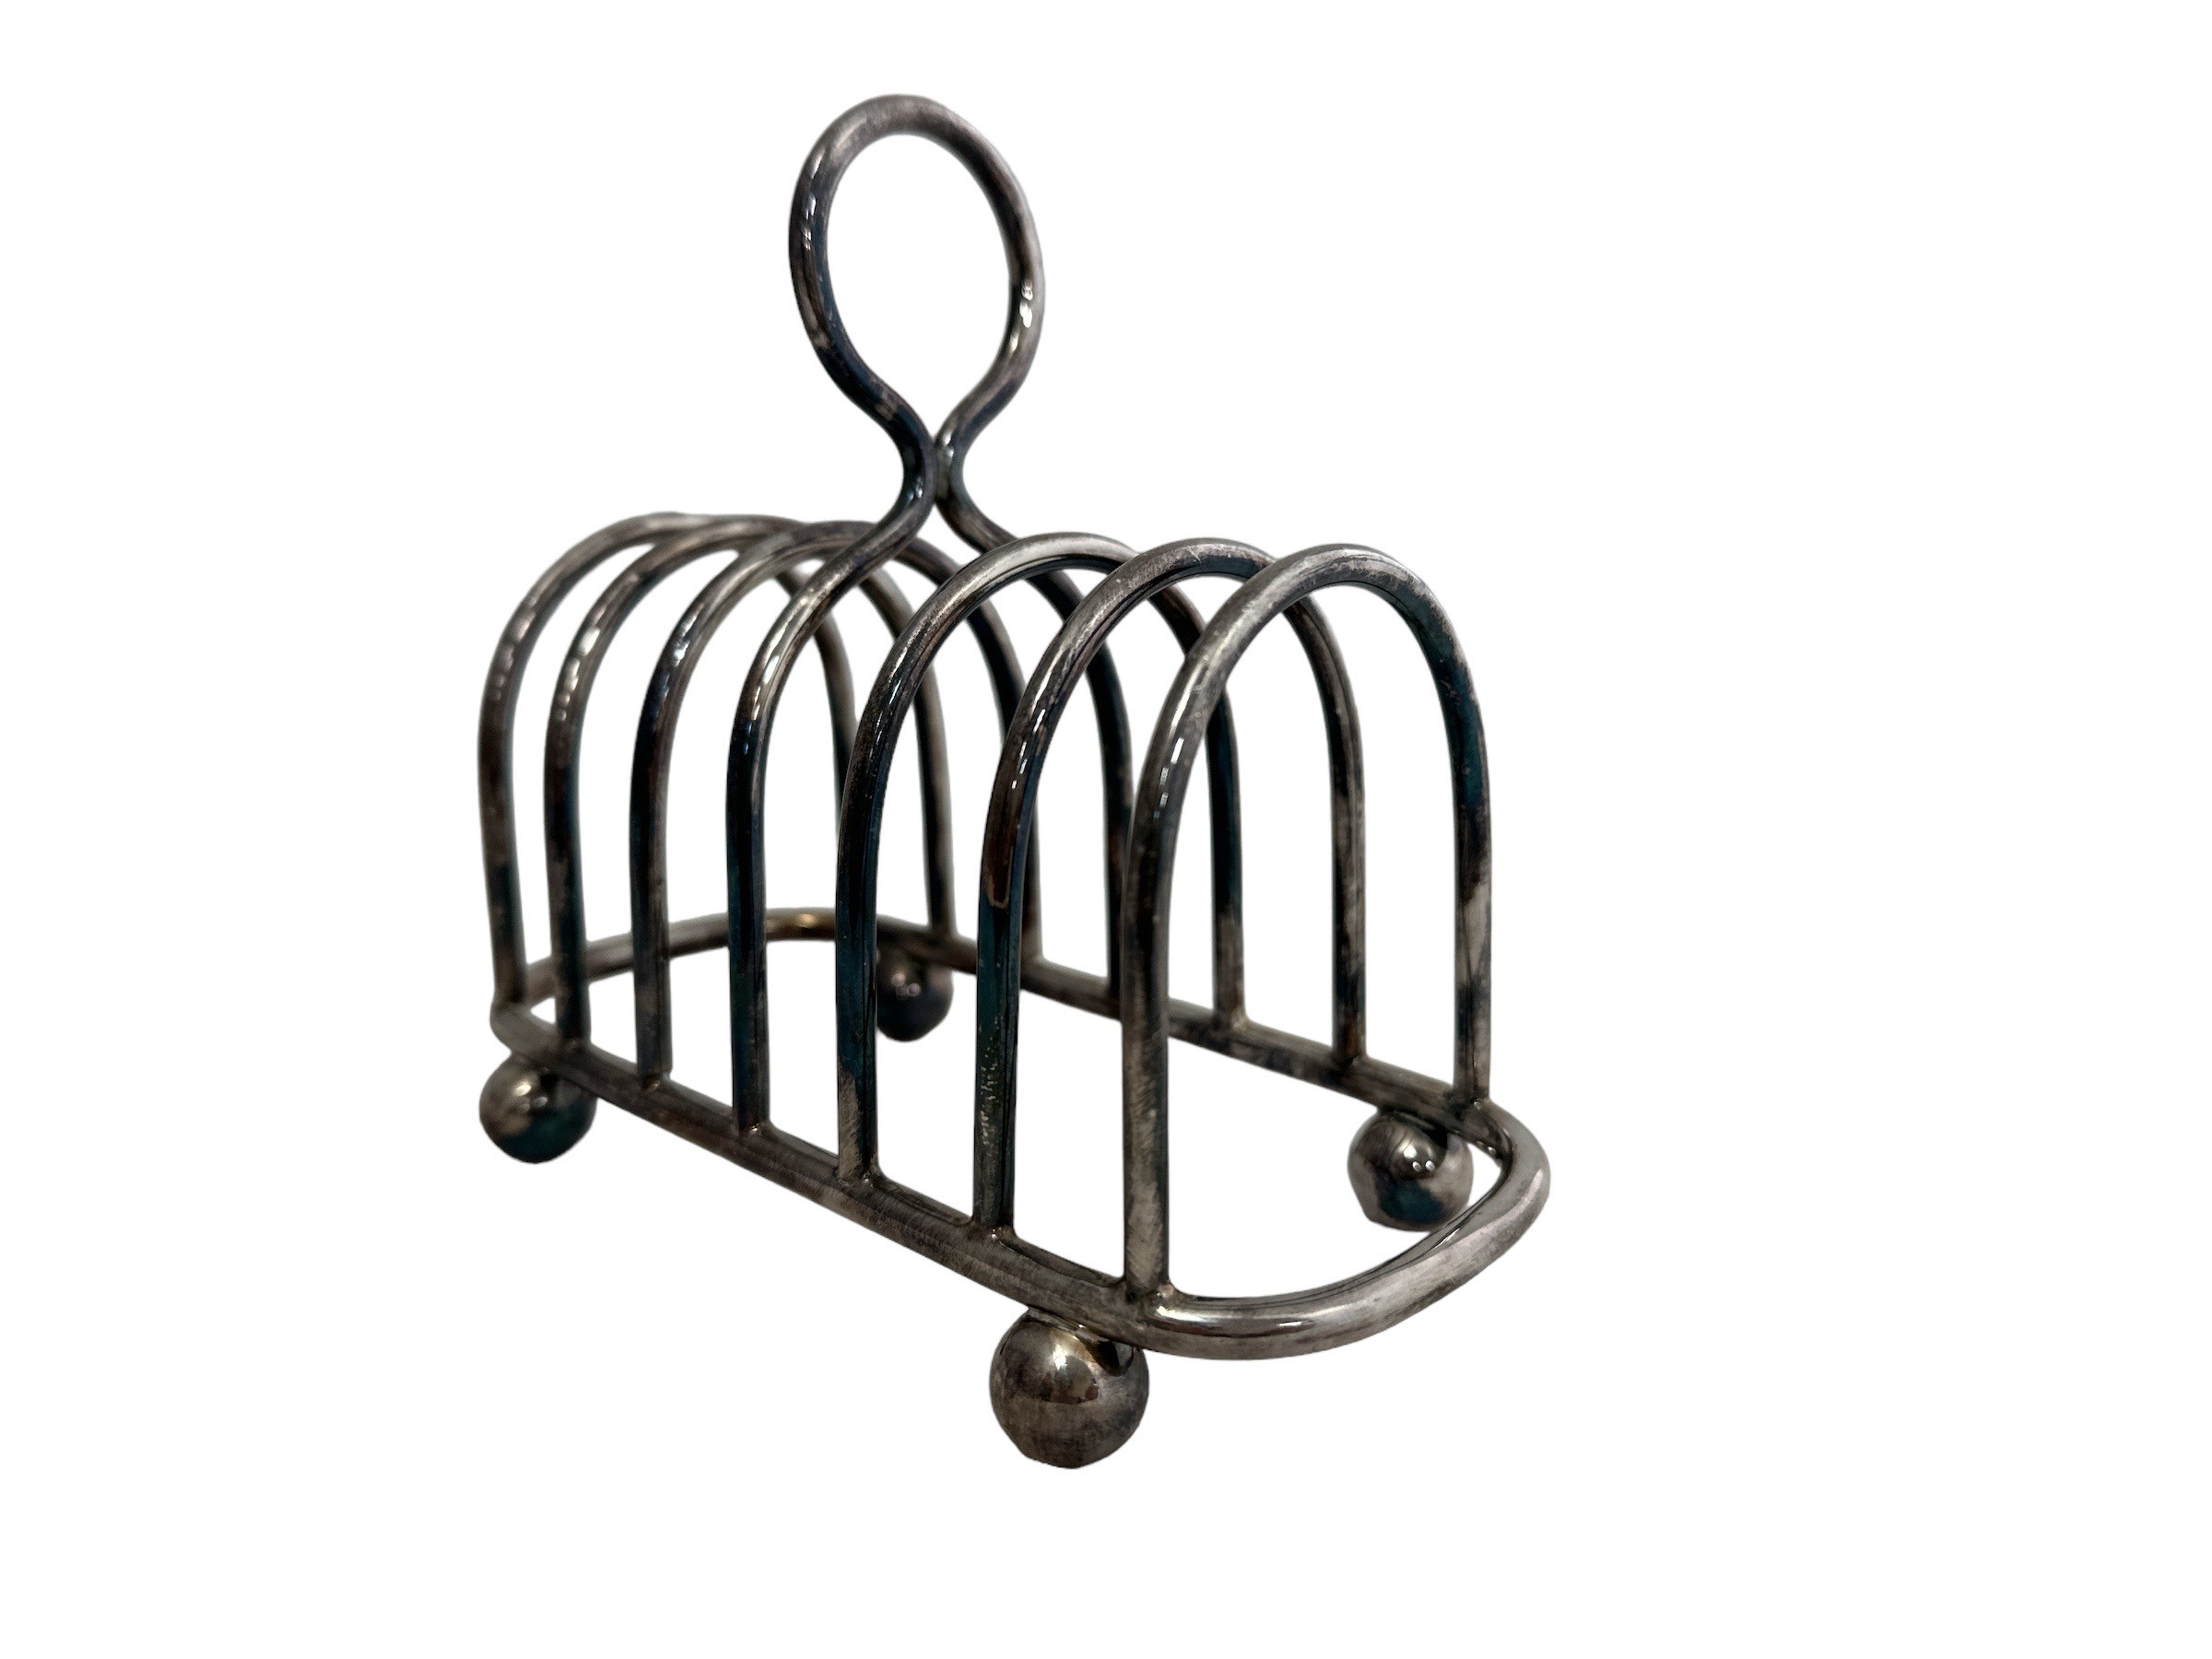 Silver plate 7 bar toast rack by Walker & Hall, central ring handle and bun feet. - Image 2 of 2